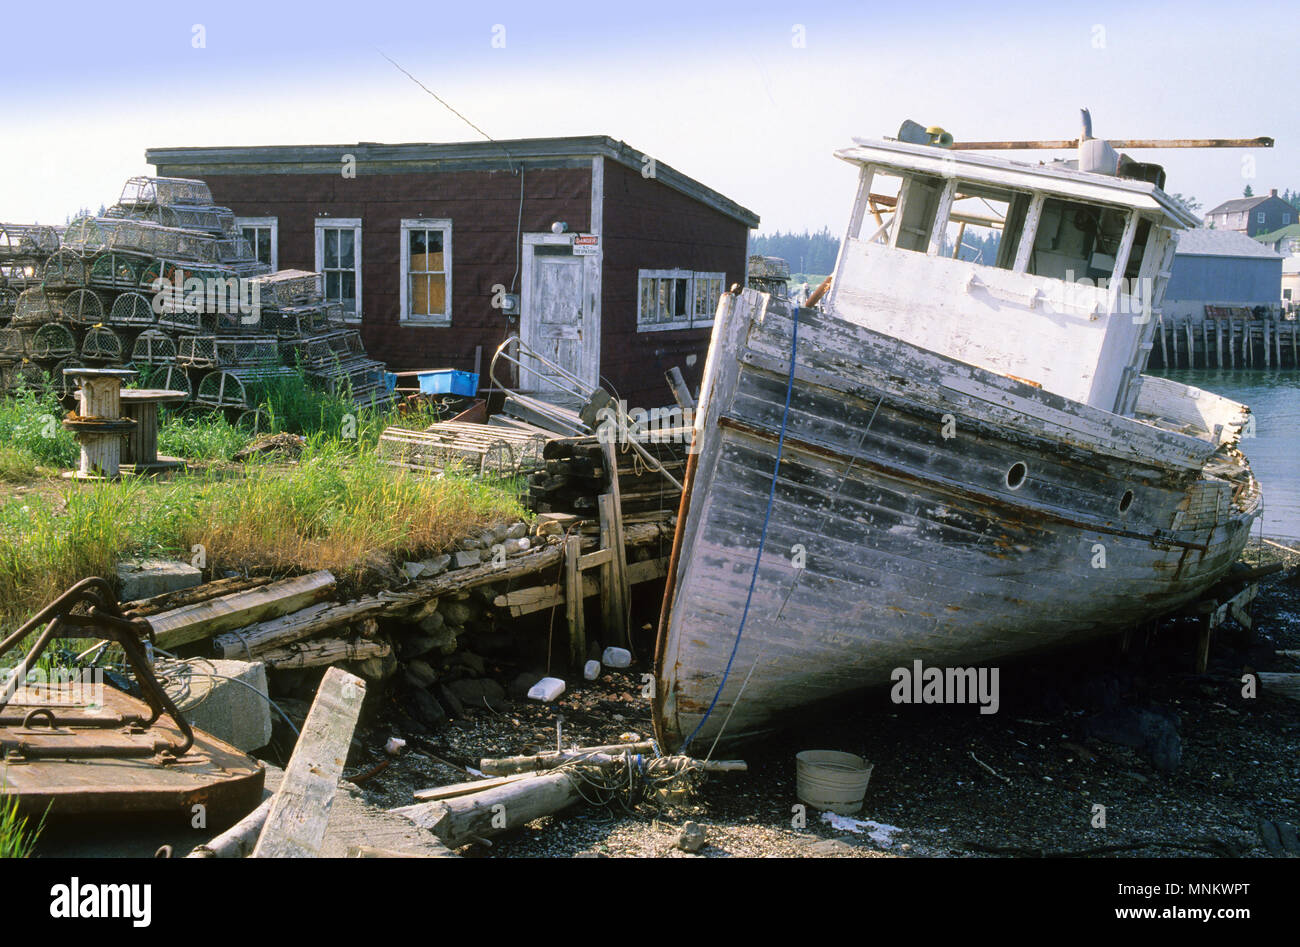 An abandoned lobster boat and yard in Port Clyde, Maine, USA Stock Photo